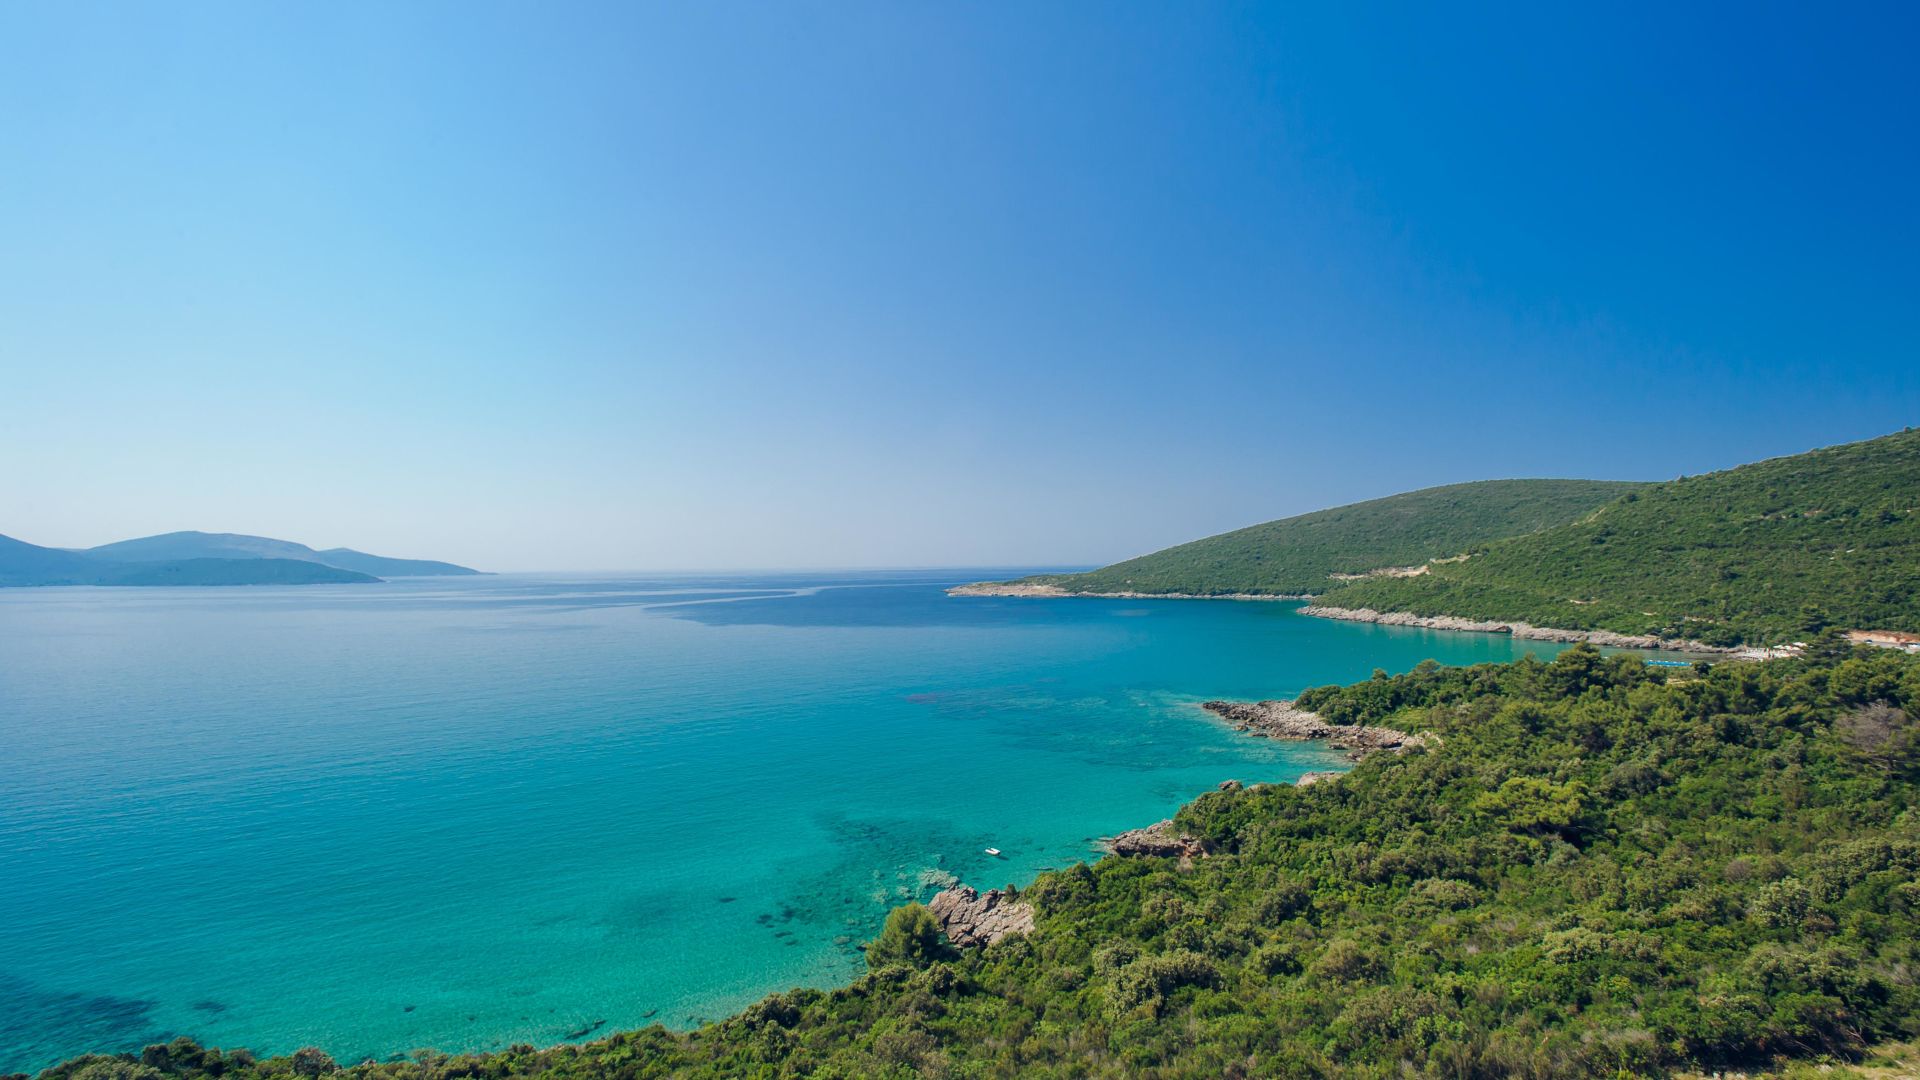 Green Mountains Surround The Sea At Lustica Bay Peninsula 